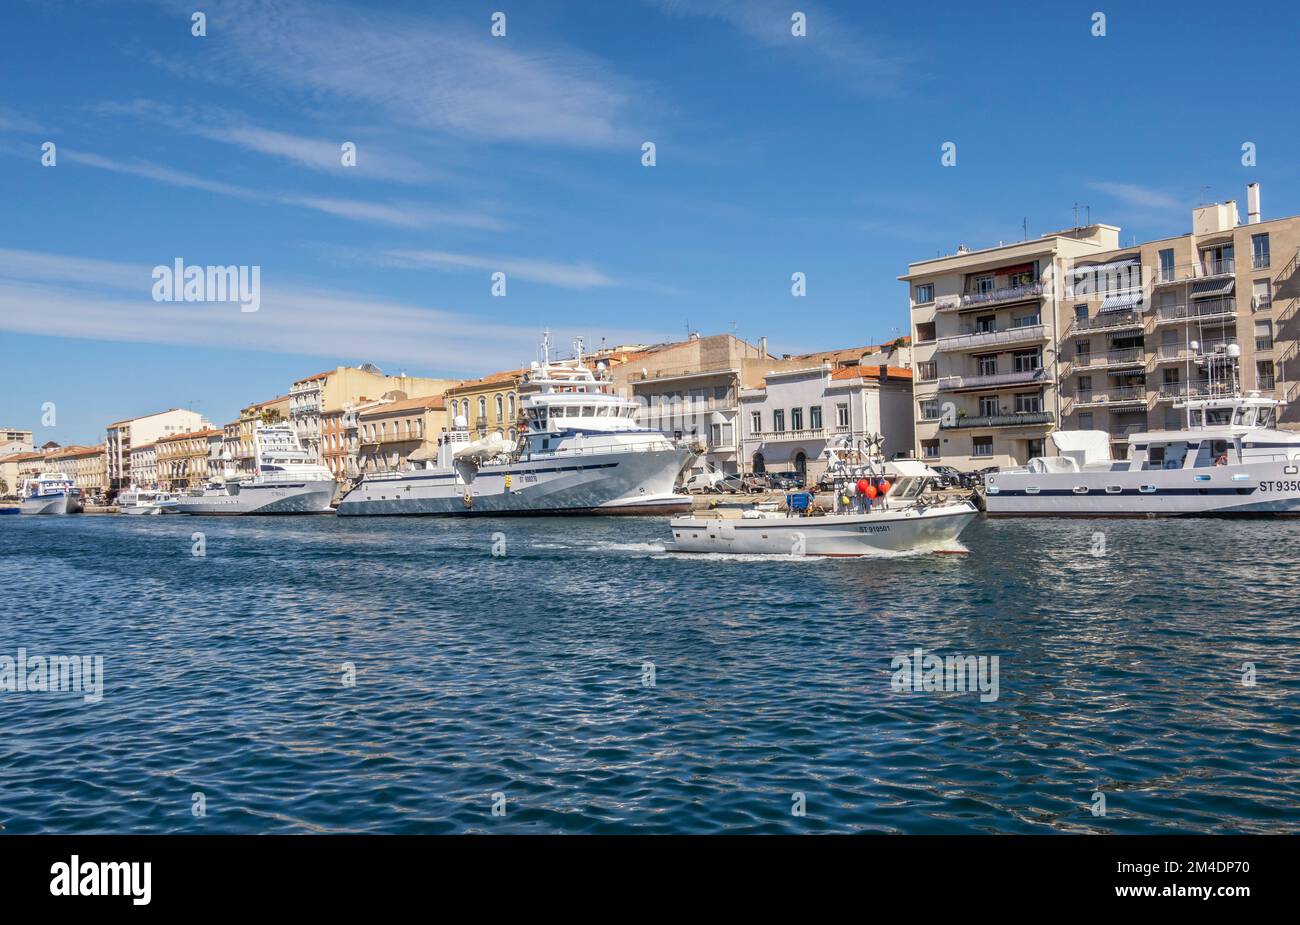 France, Sete, Canal Royal, commercial fishing vessels Stock Photo